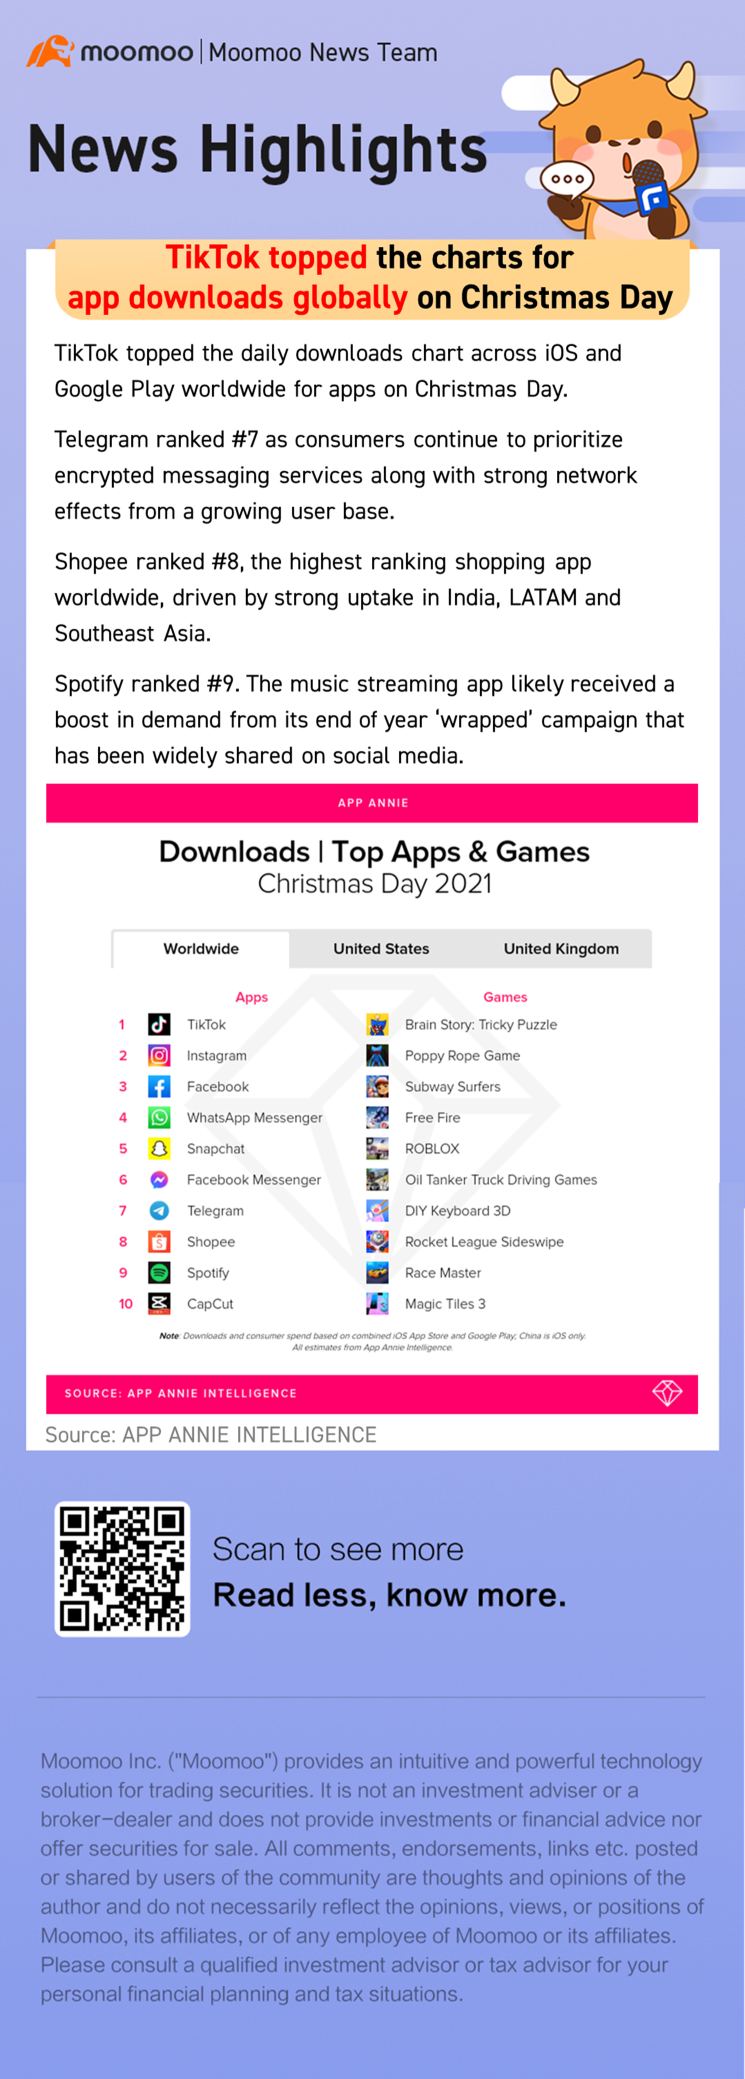 TikTok topped the charts for app downloads globally on Christmas Day